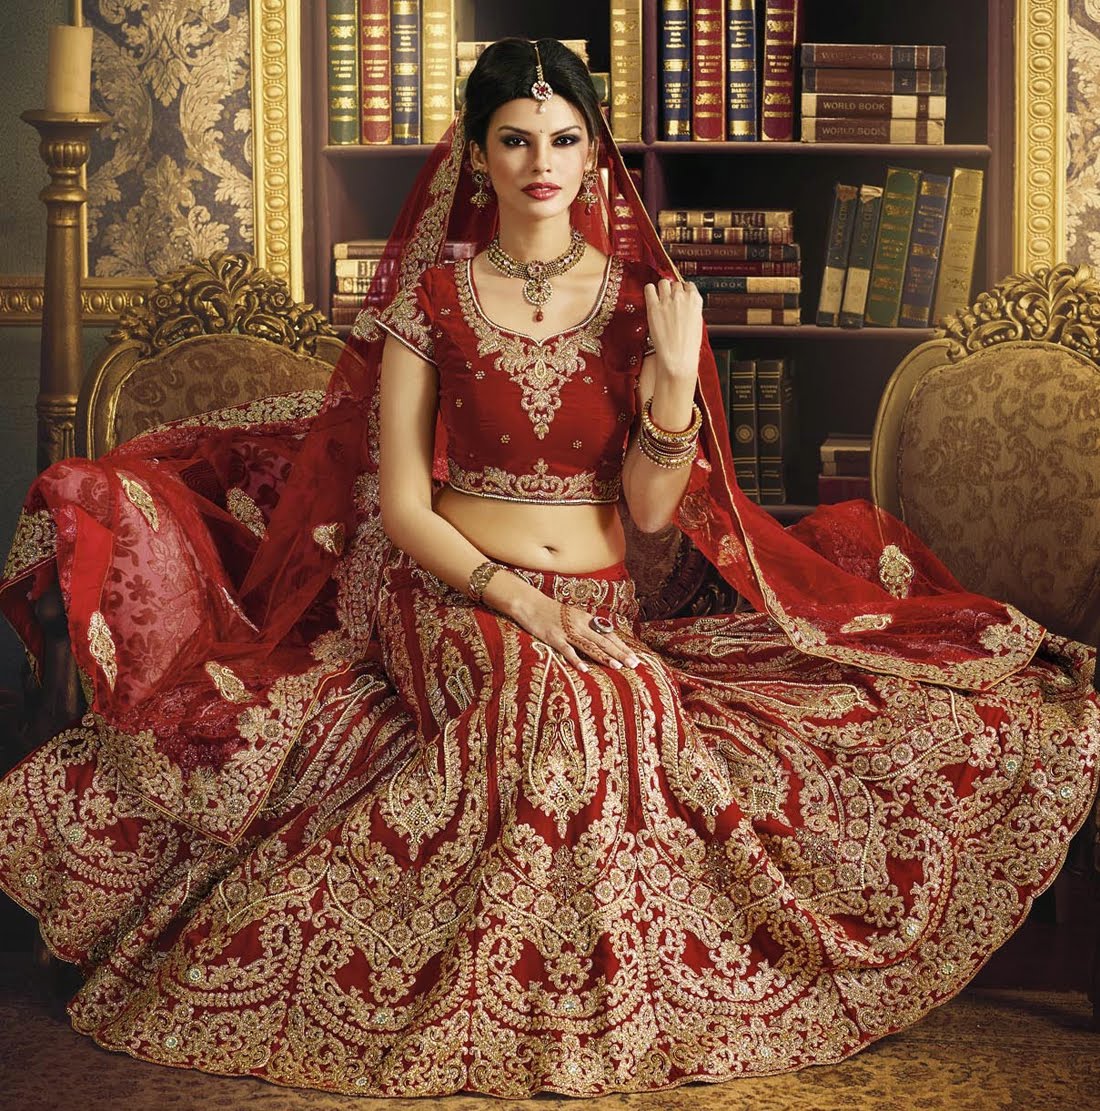 Sabyasachi Mouni Roy wedding design for ₹10,000 to 1 Lakh 😂🙌🏻 I didn't  get any of these obviously because agar Sabyasachi ke... | Instagram